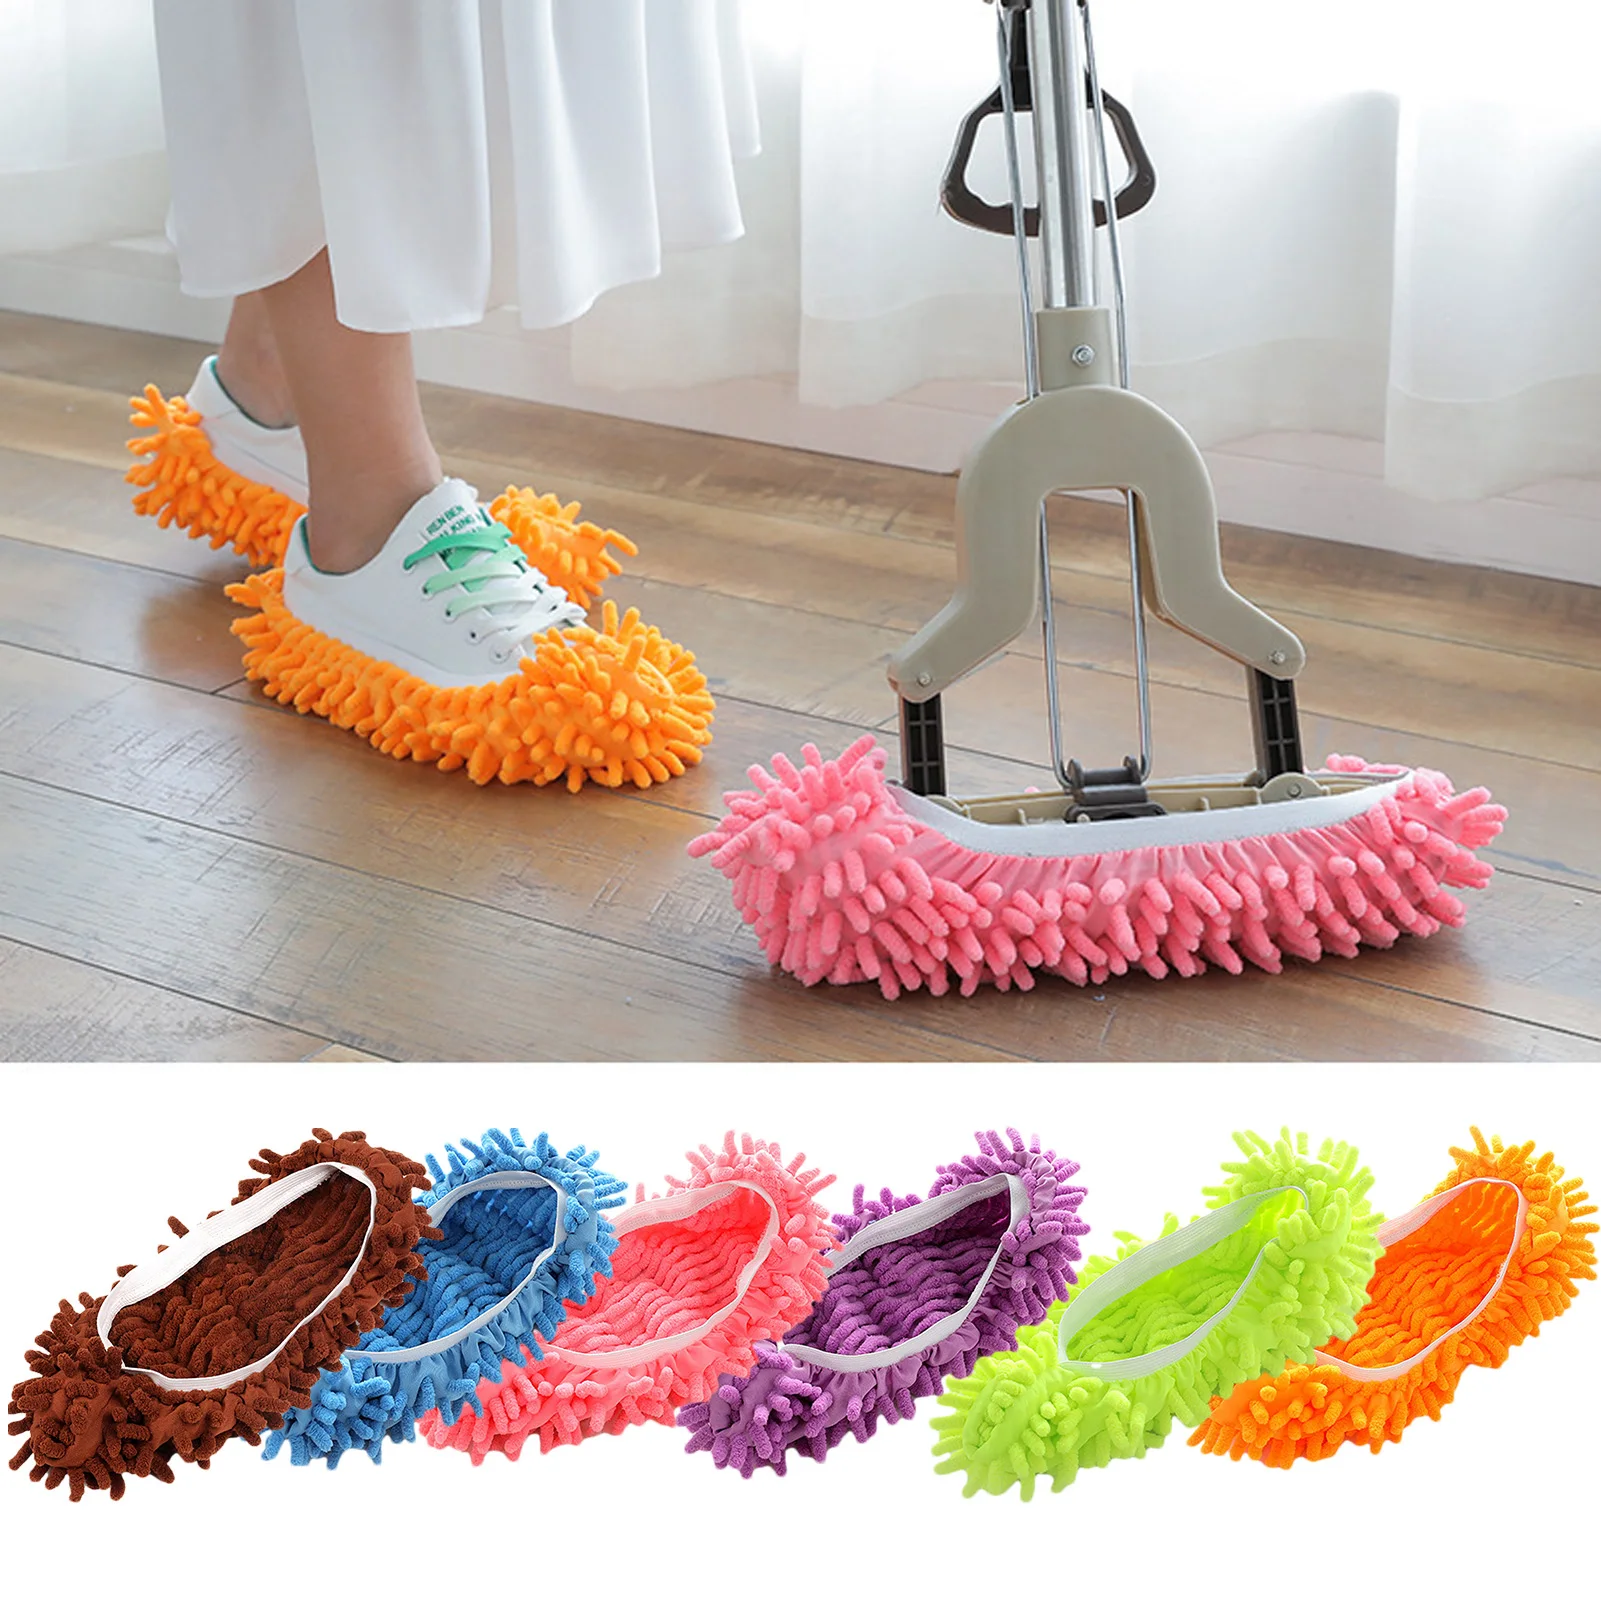 Washable Mop Slippers Microfiber 2x Lazy Foot Socks Cleaner Foot Shoes  Cover for kitchen and office Bathroom Floor Dusting , Blue, 17x15cm -  Walmart.com